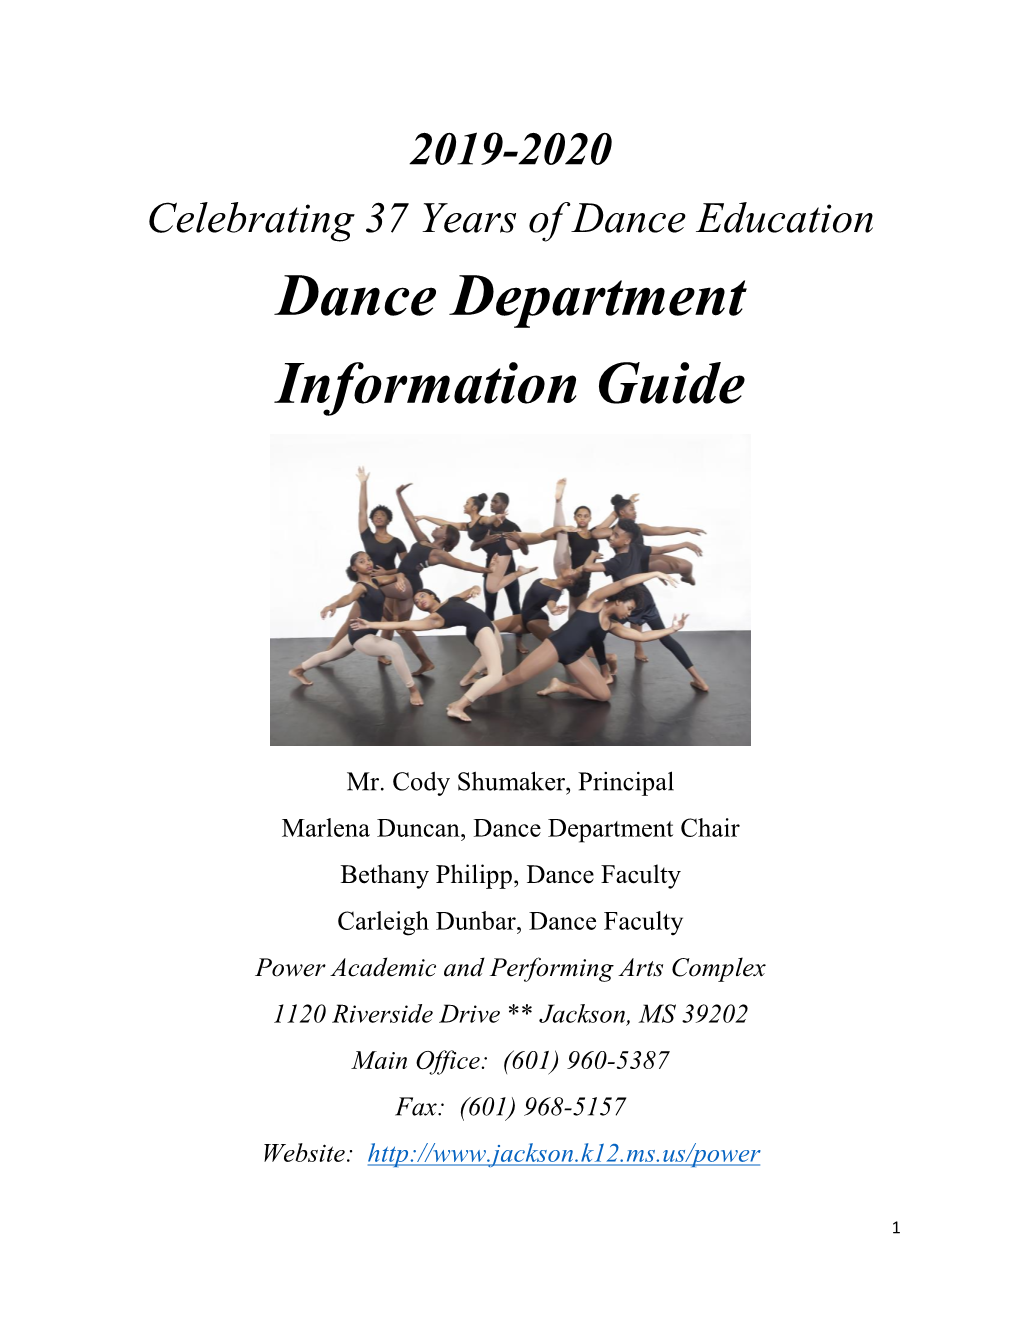 Dance Department Information Guide